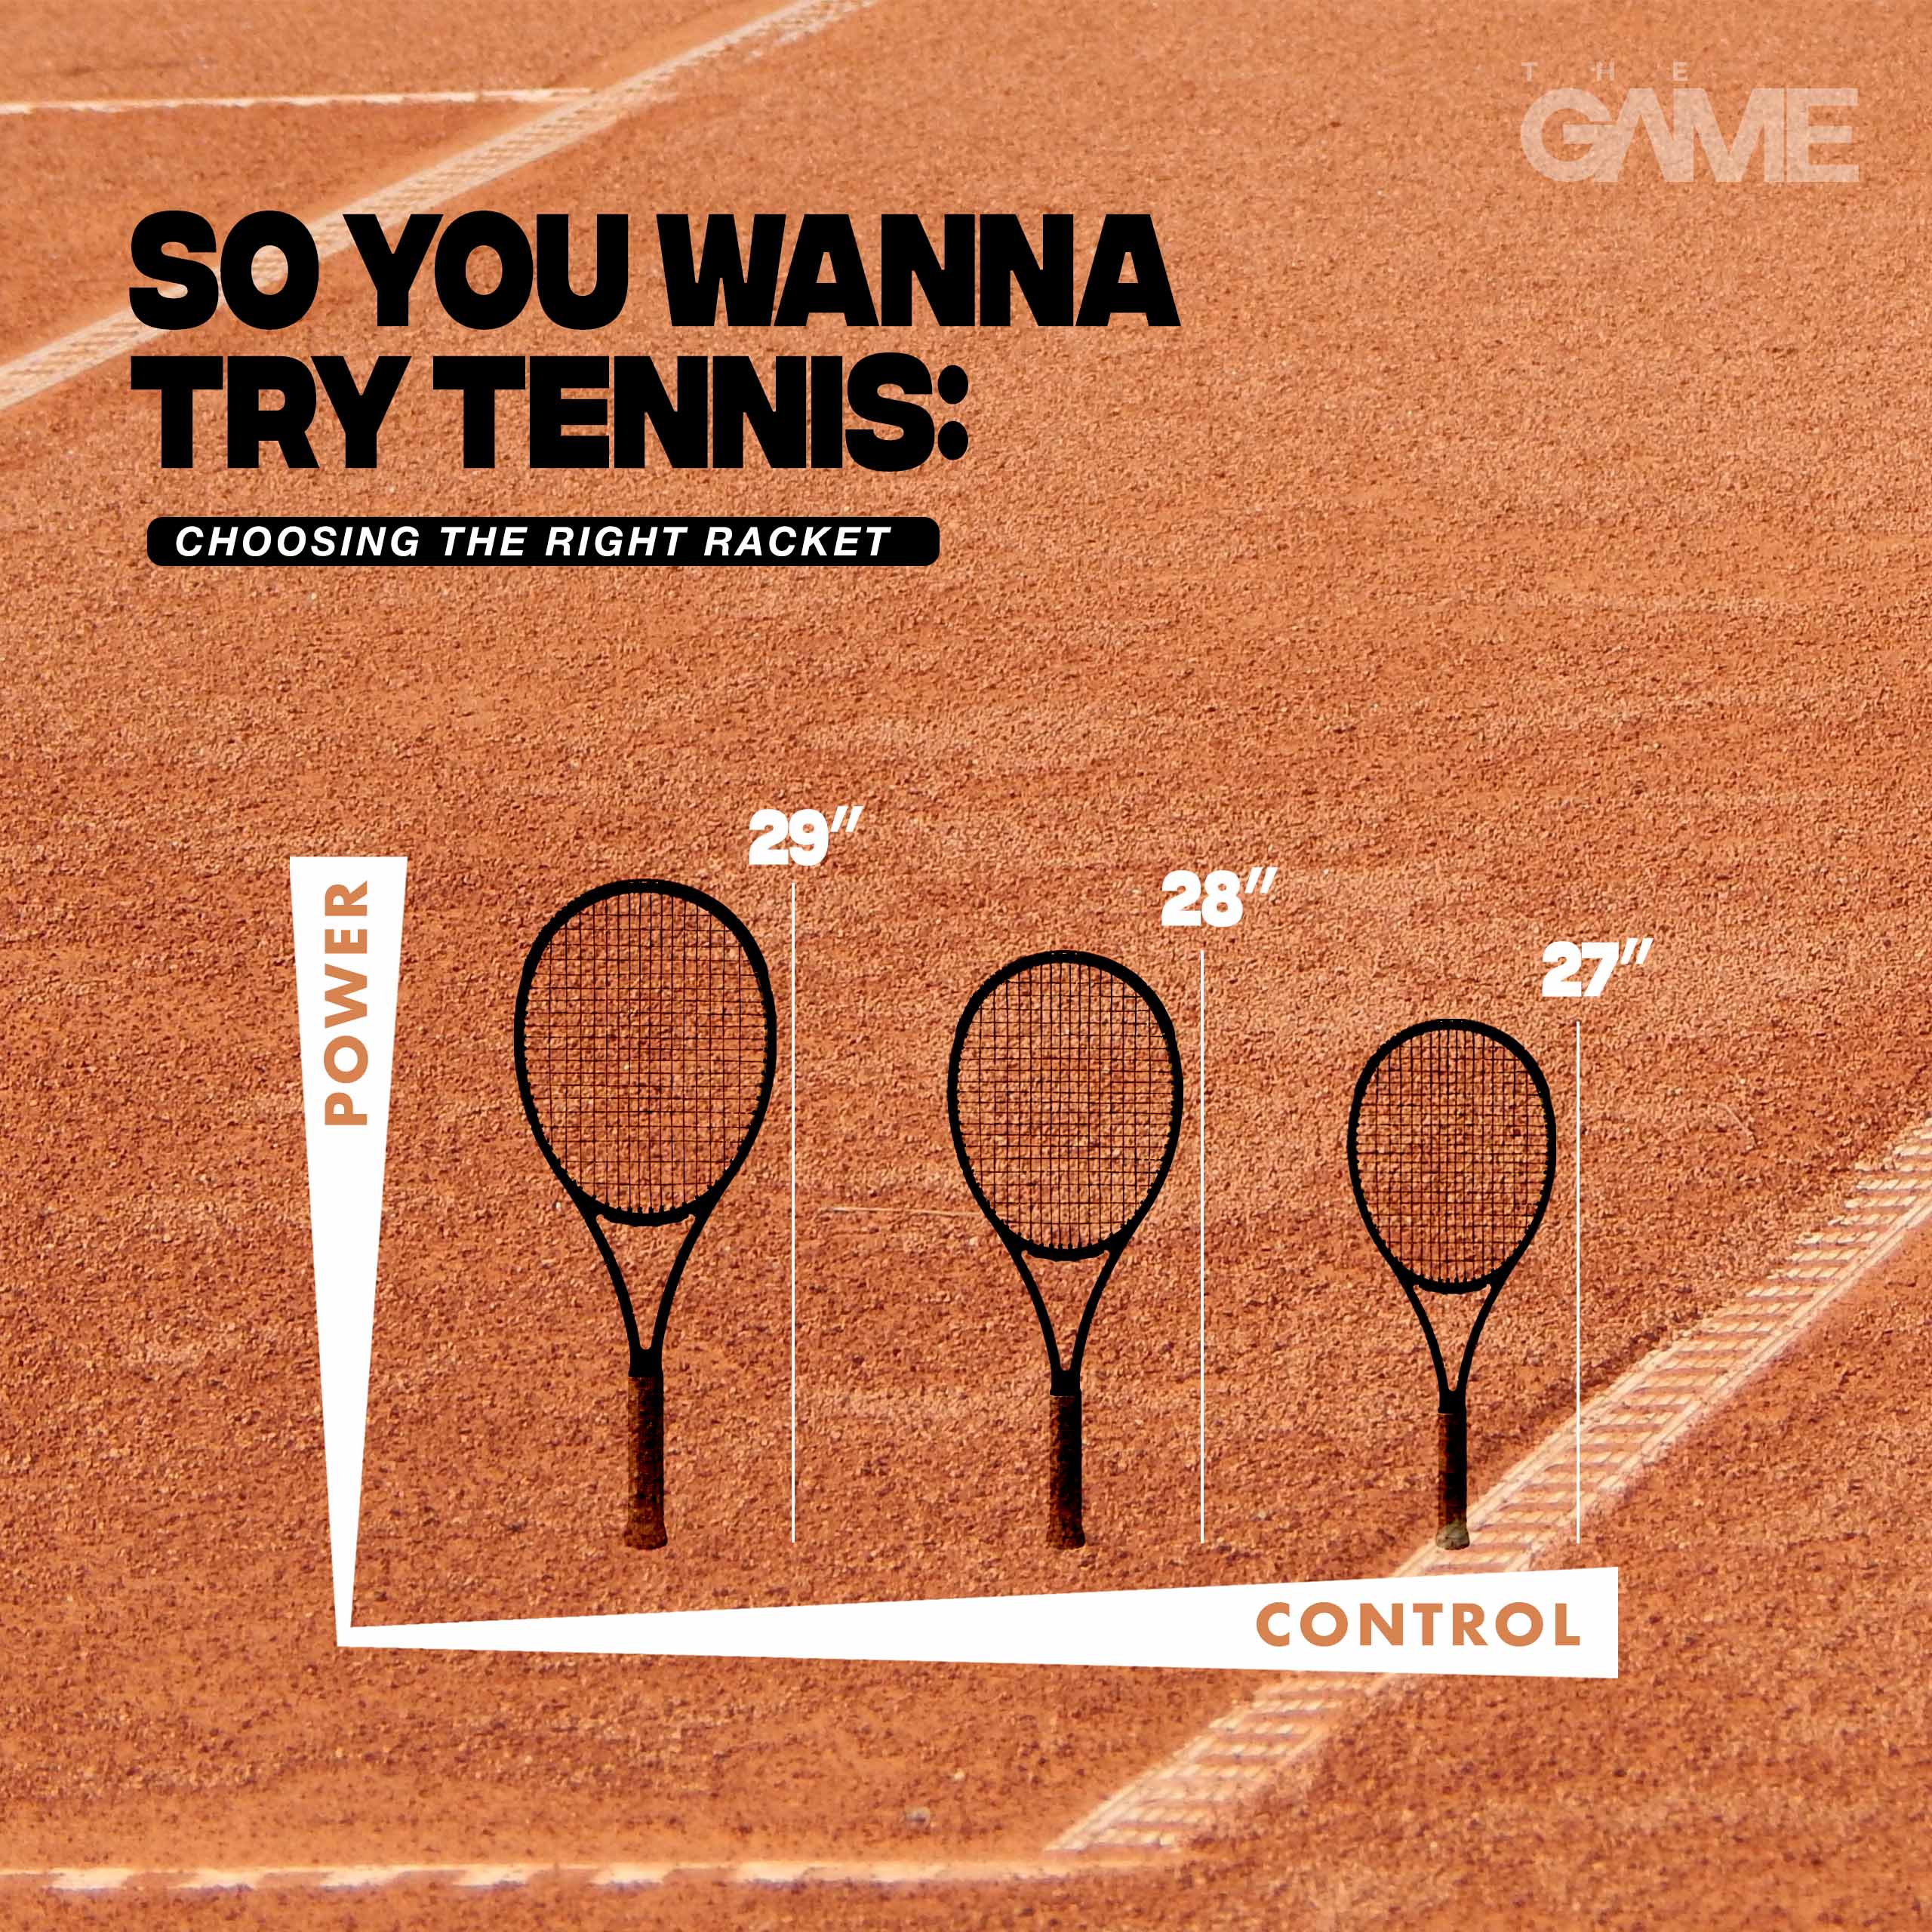 There are different sizes when choosing your tennis racket.